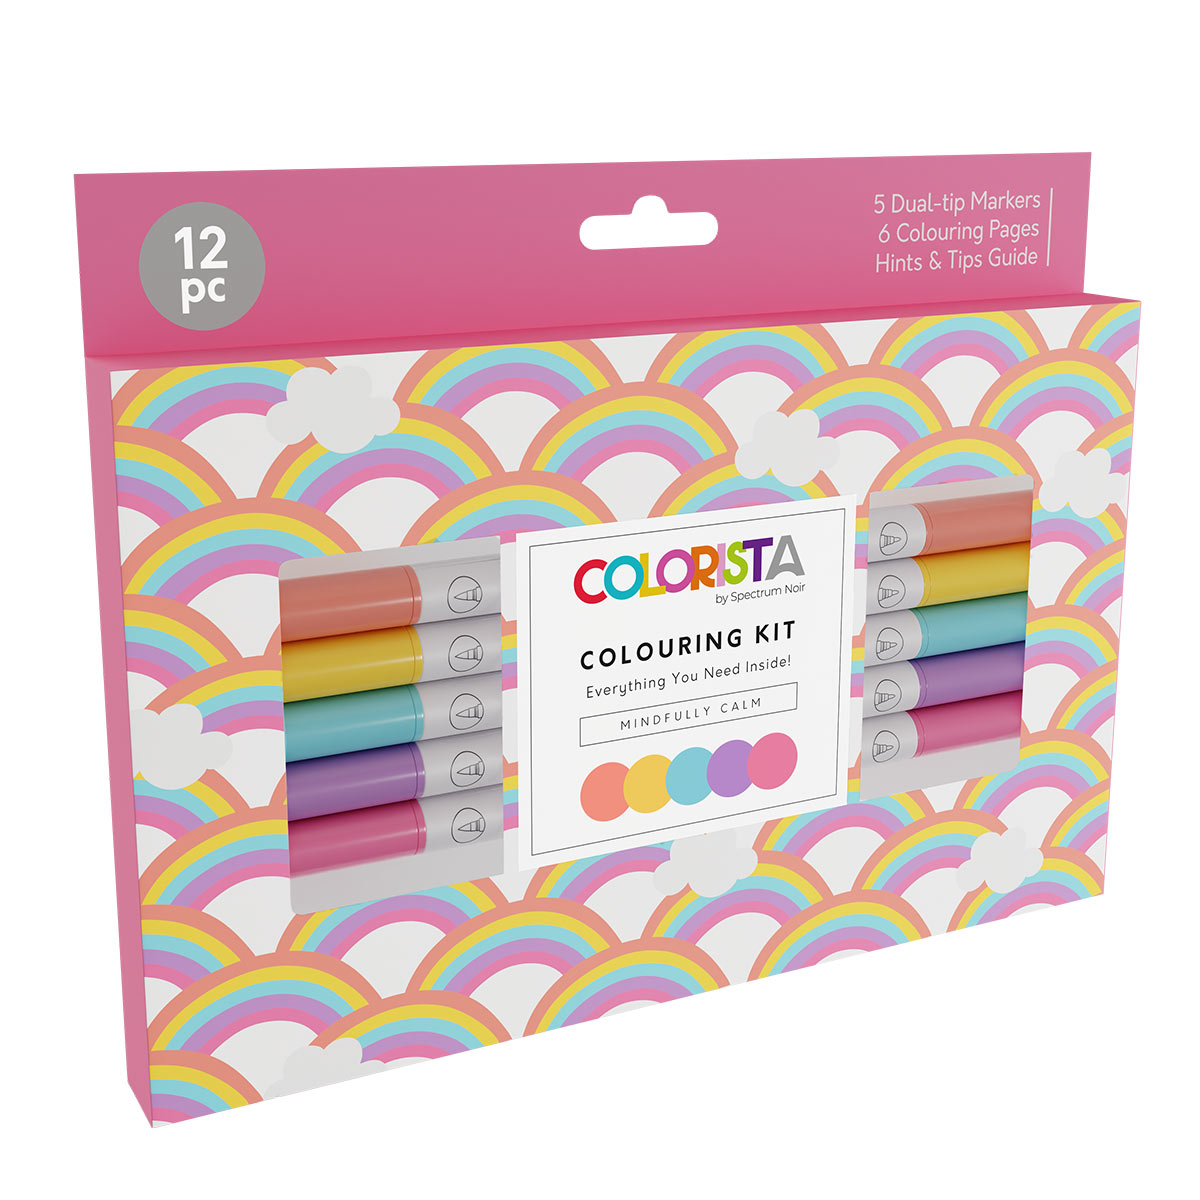 Spectrum Noir Colorista - Colouring Kit - Dual-tip Alcohol Brush Markers  - Mindfully Calm